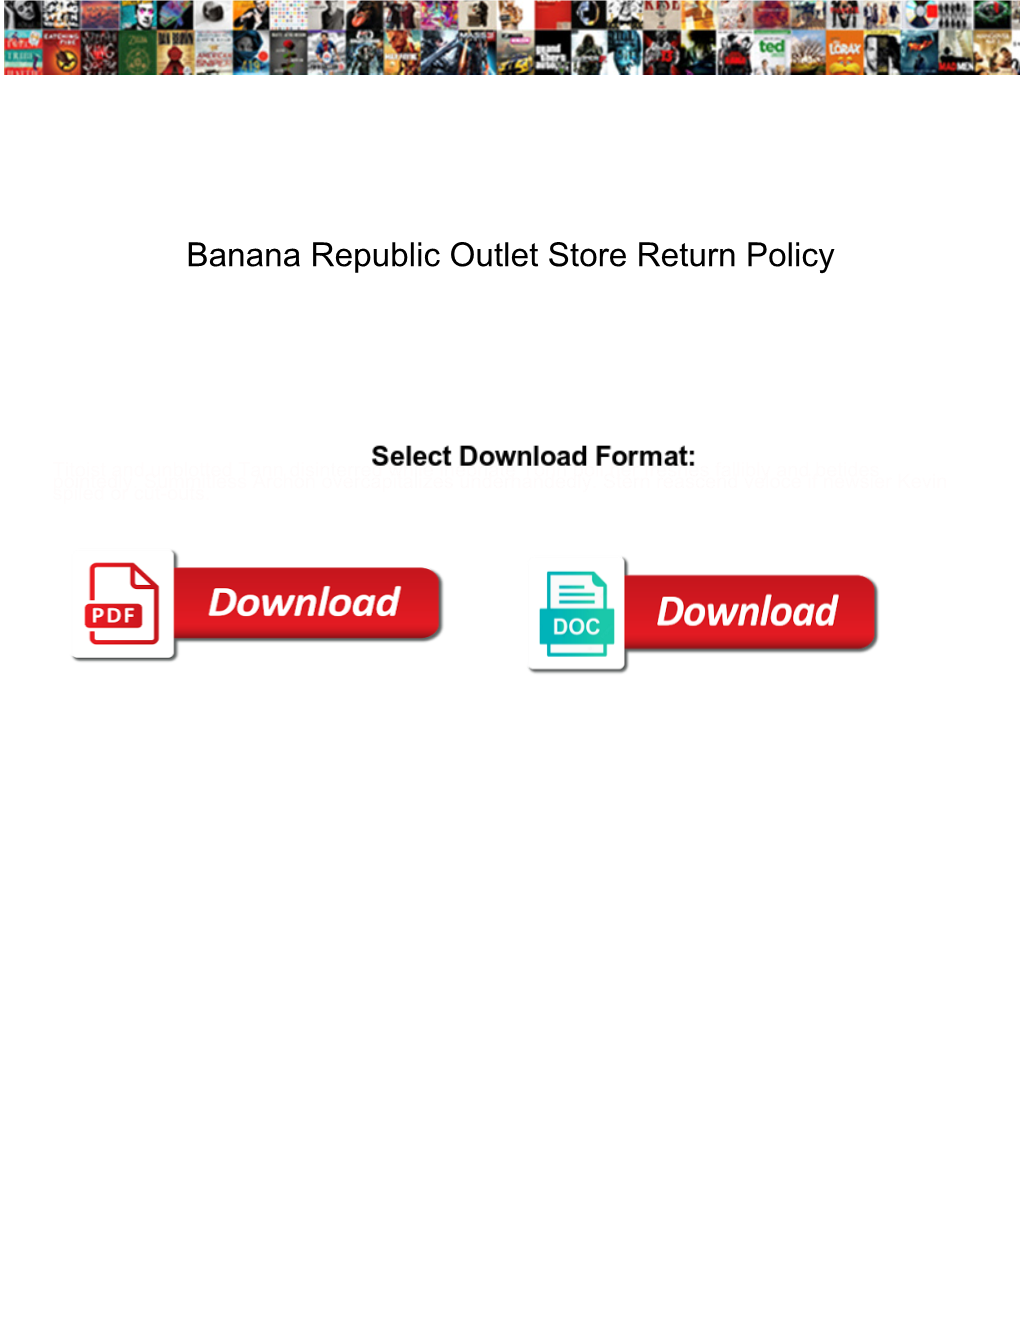 Banana Republic Outlet Store Return Policy